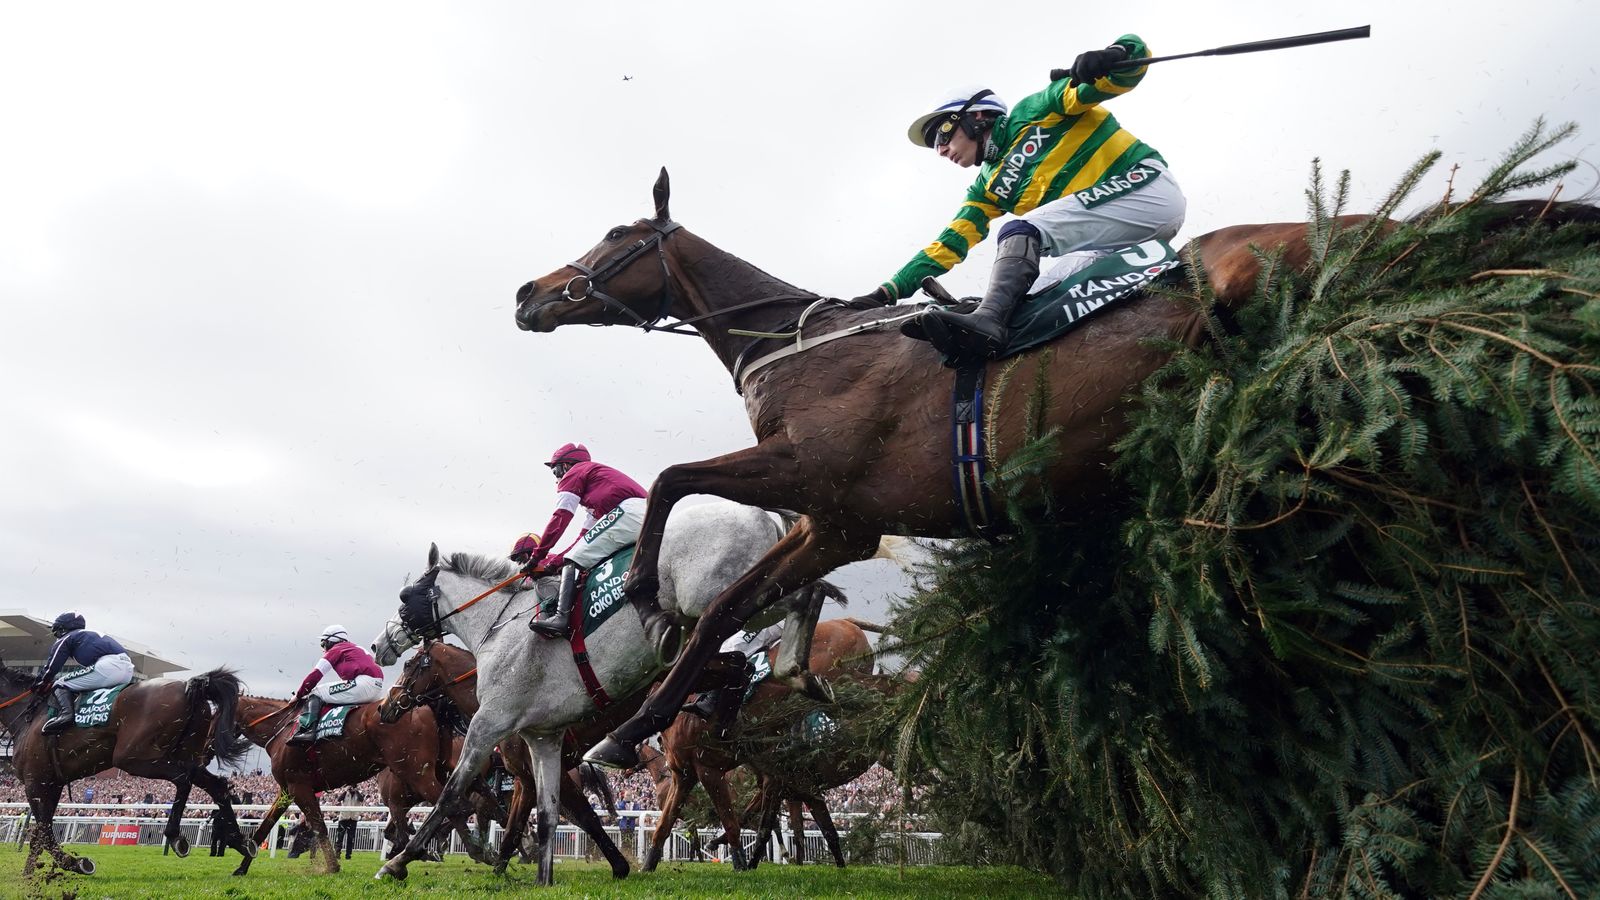 i am maximus wins grand national - and no horses fall at this year's event